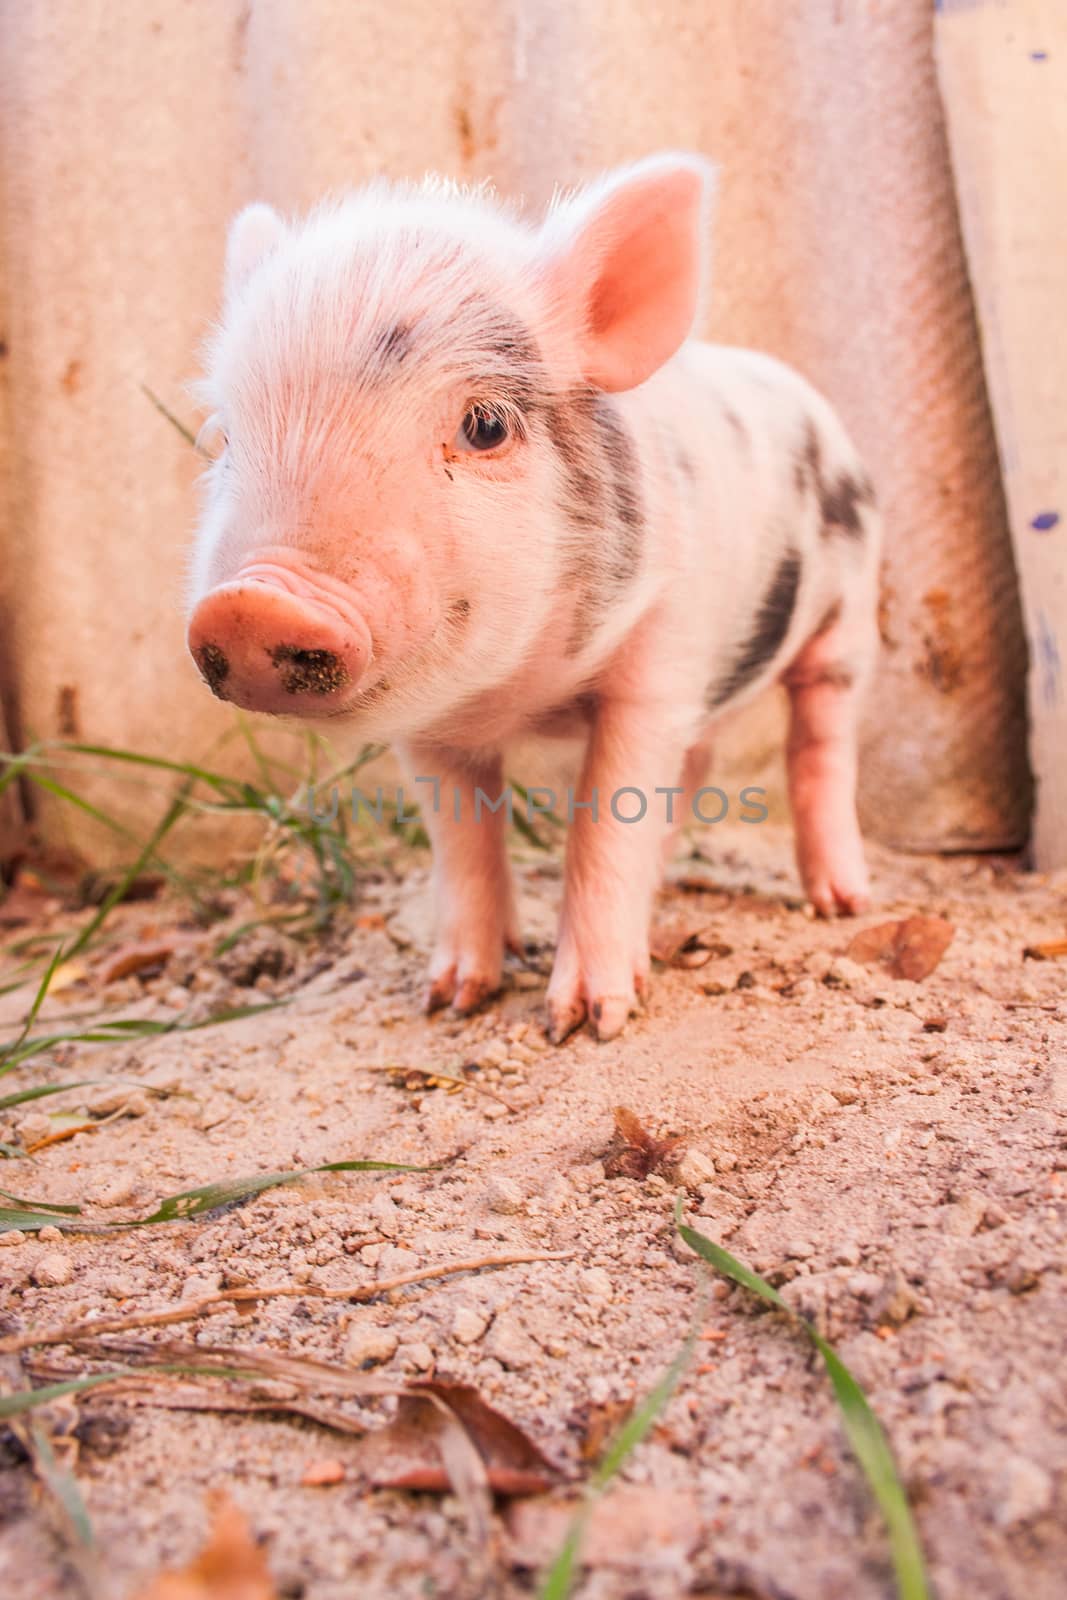 Close-up of a cute muddy piglet running around outdoors on the f by bloodua